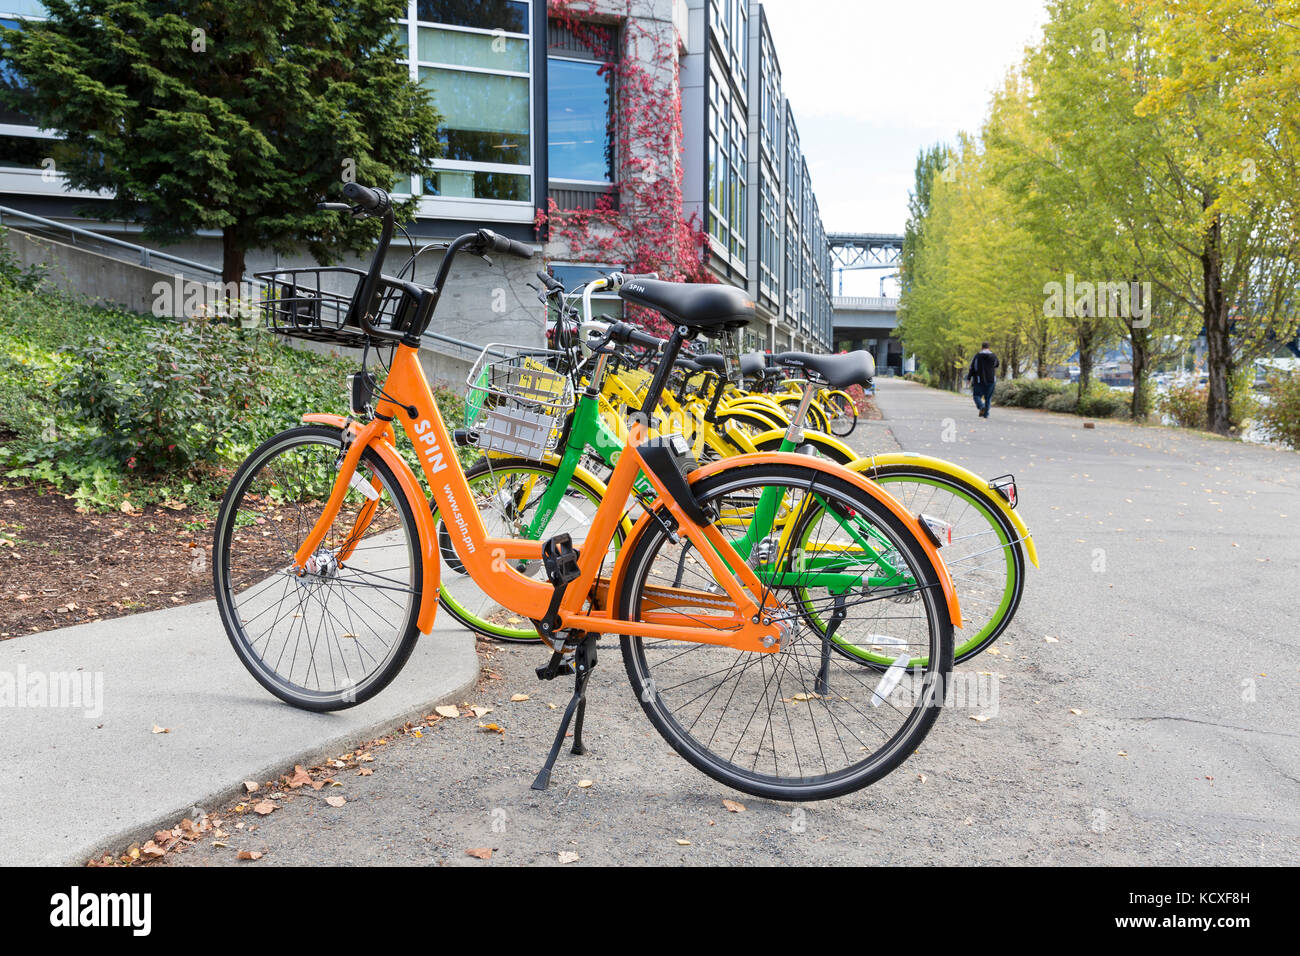 Seattle, Washington: A variety of cycle-share bikes parked at Google Seattle Waterside in Fremont.  LimeBike (green), Ofo bike (yellow) and Spin bike  Stock Photo